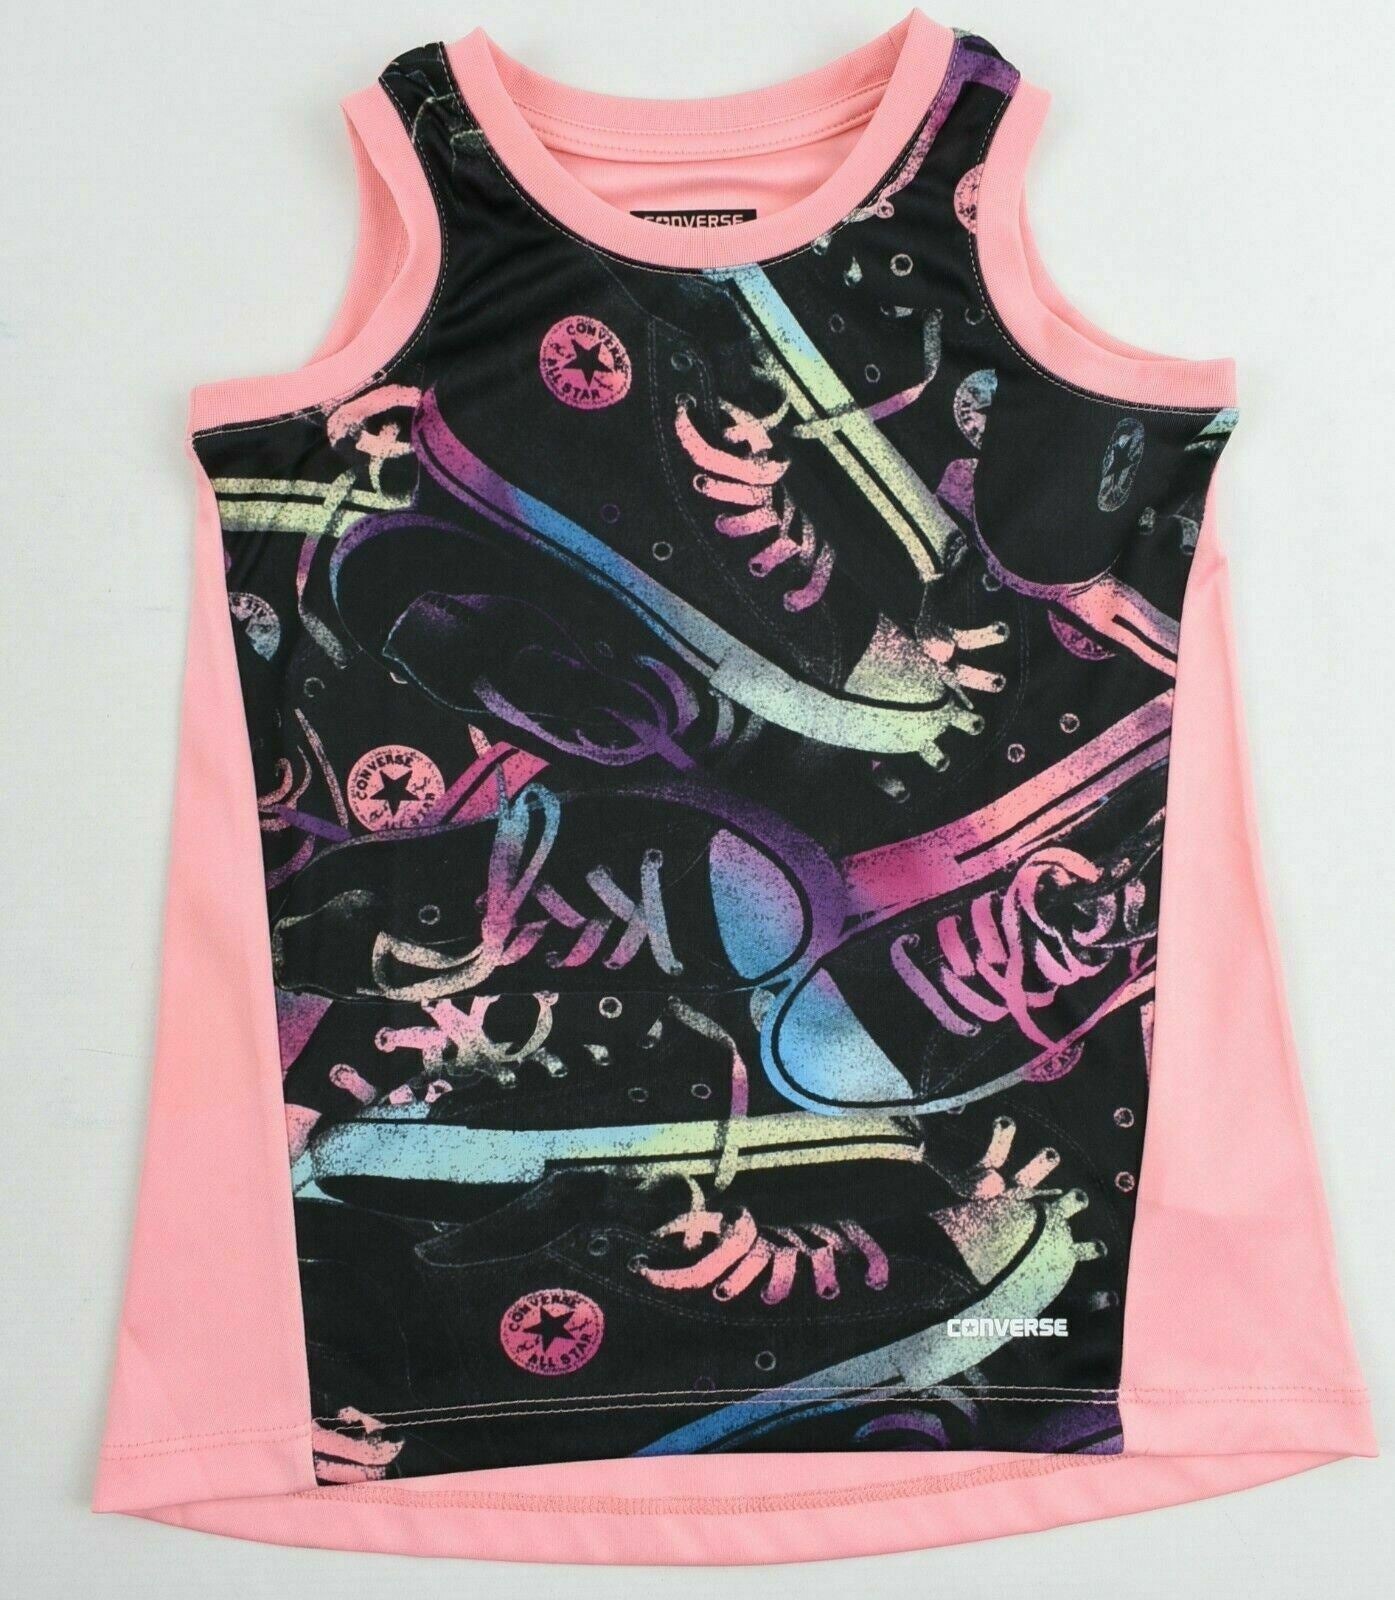 CONVERSE Girls' Kids' Pink & Graphic Print Vest Top Tank Top, 4 years to 5 years